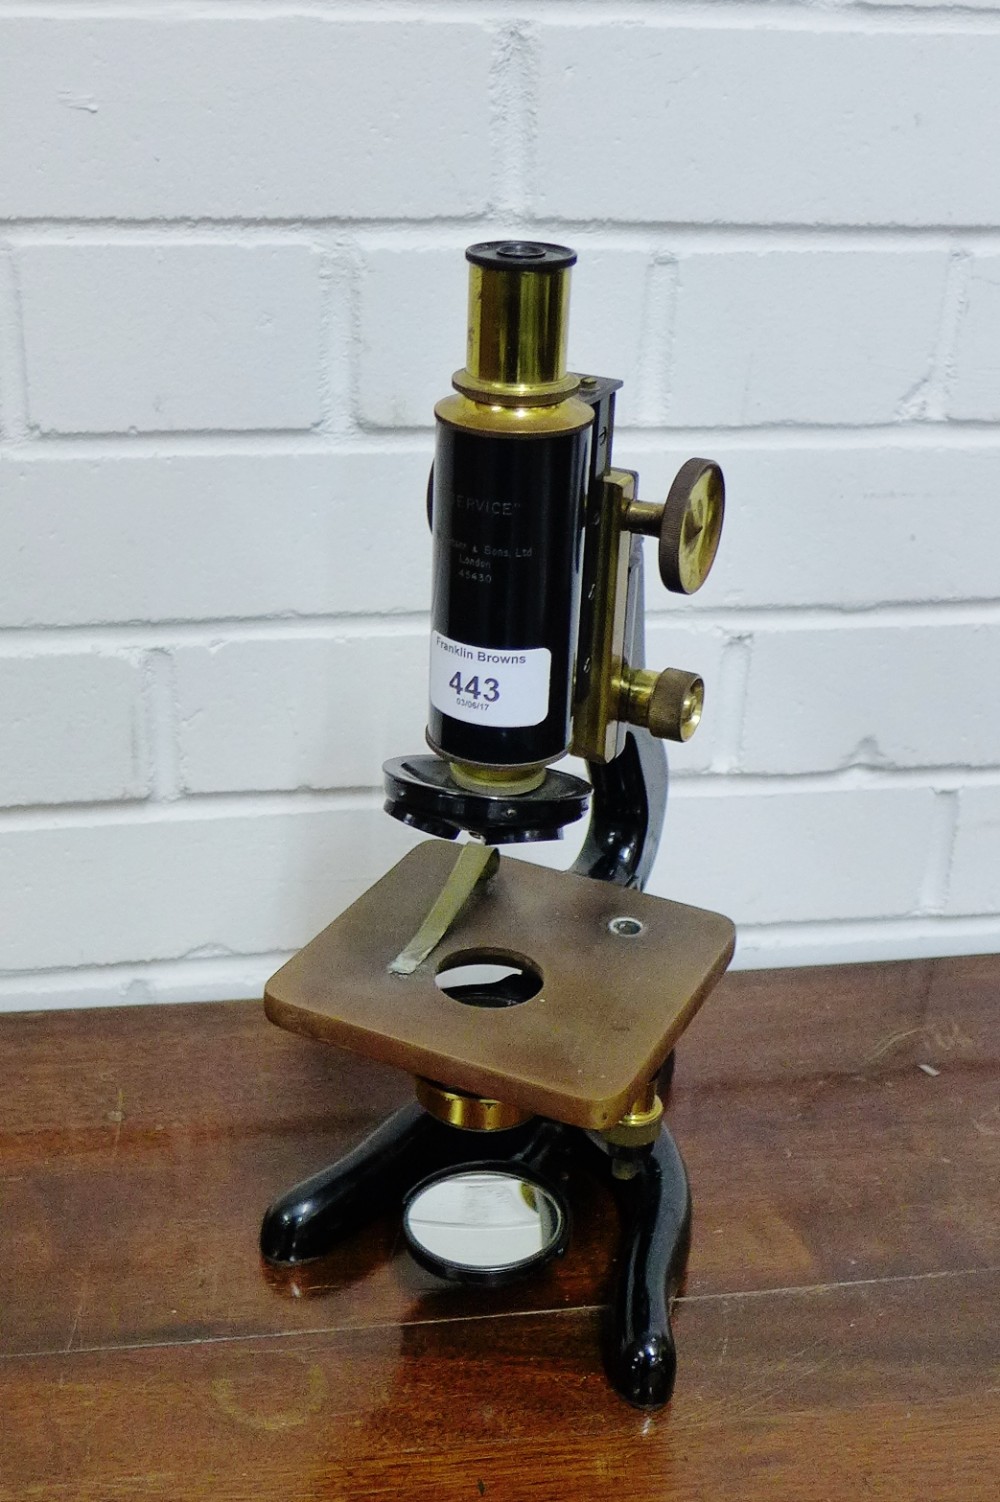 A W. Watson & Son's Limited of London, Service monocular brass lacquered microscope numbered 45430